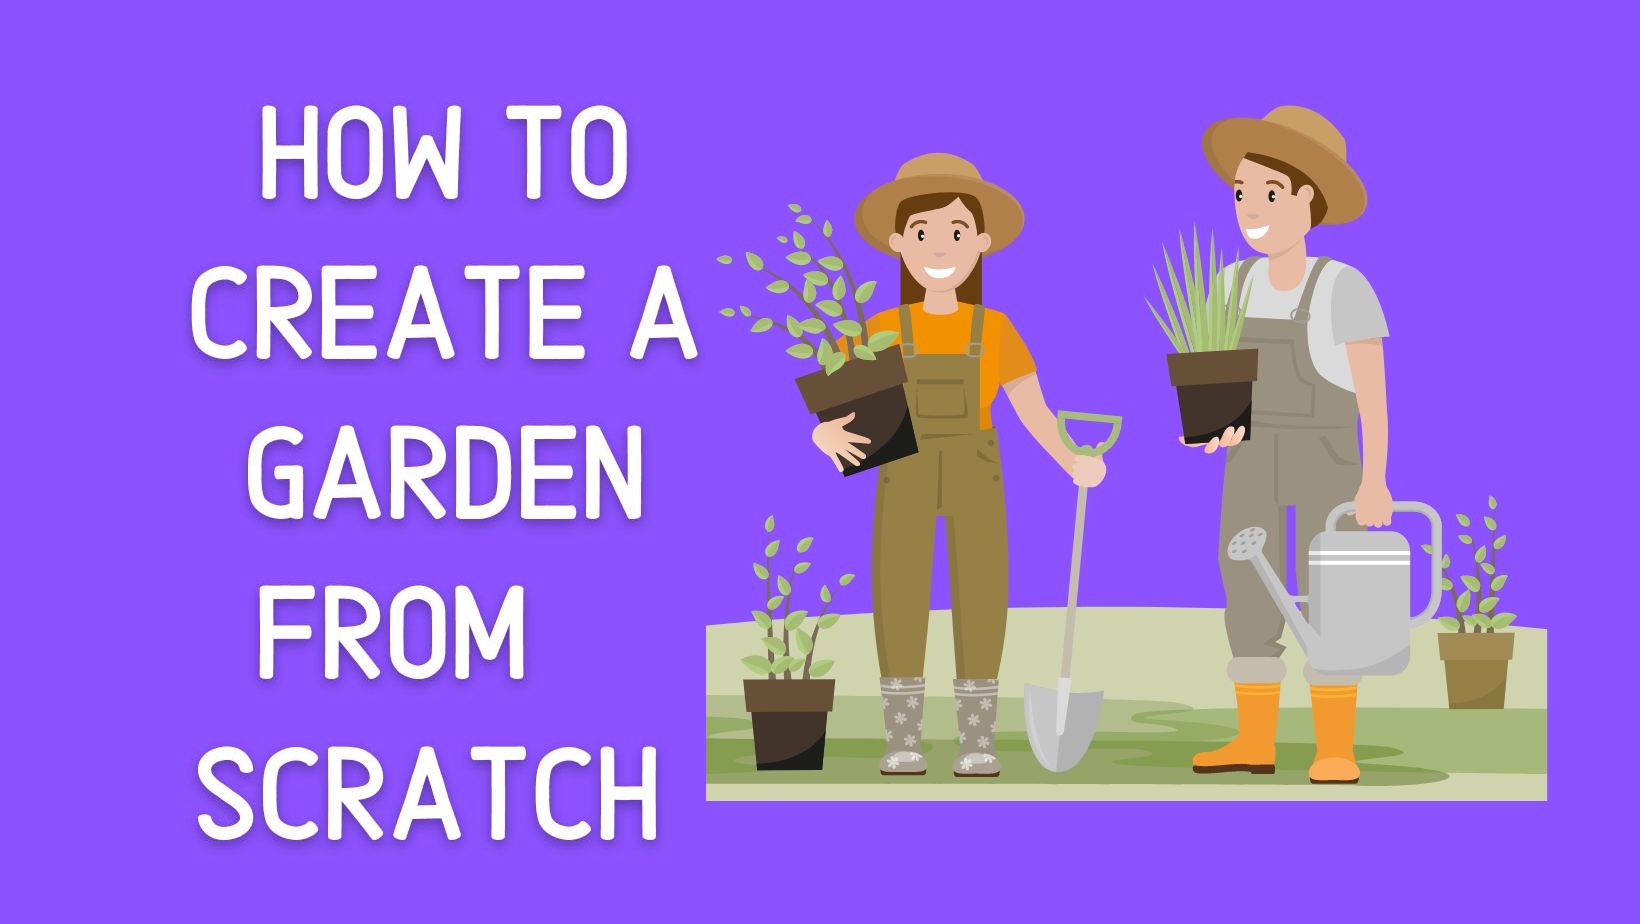 How To Create A Garden From Scratch